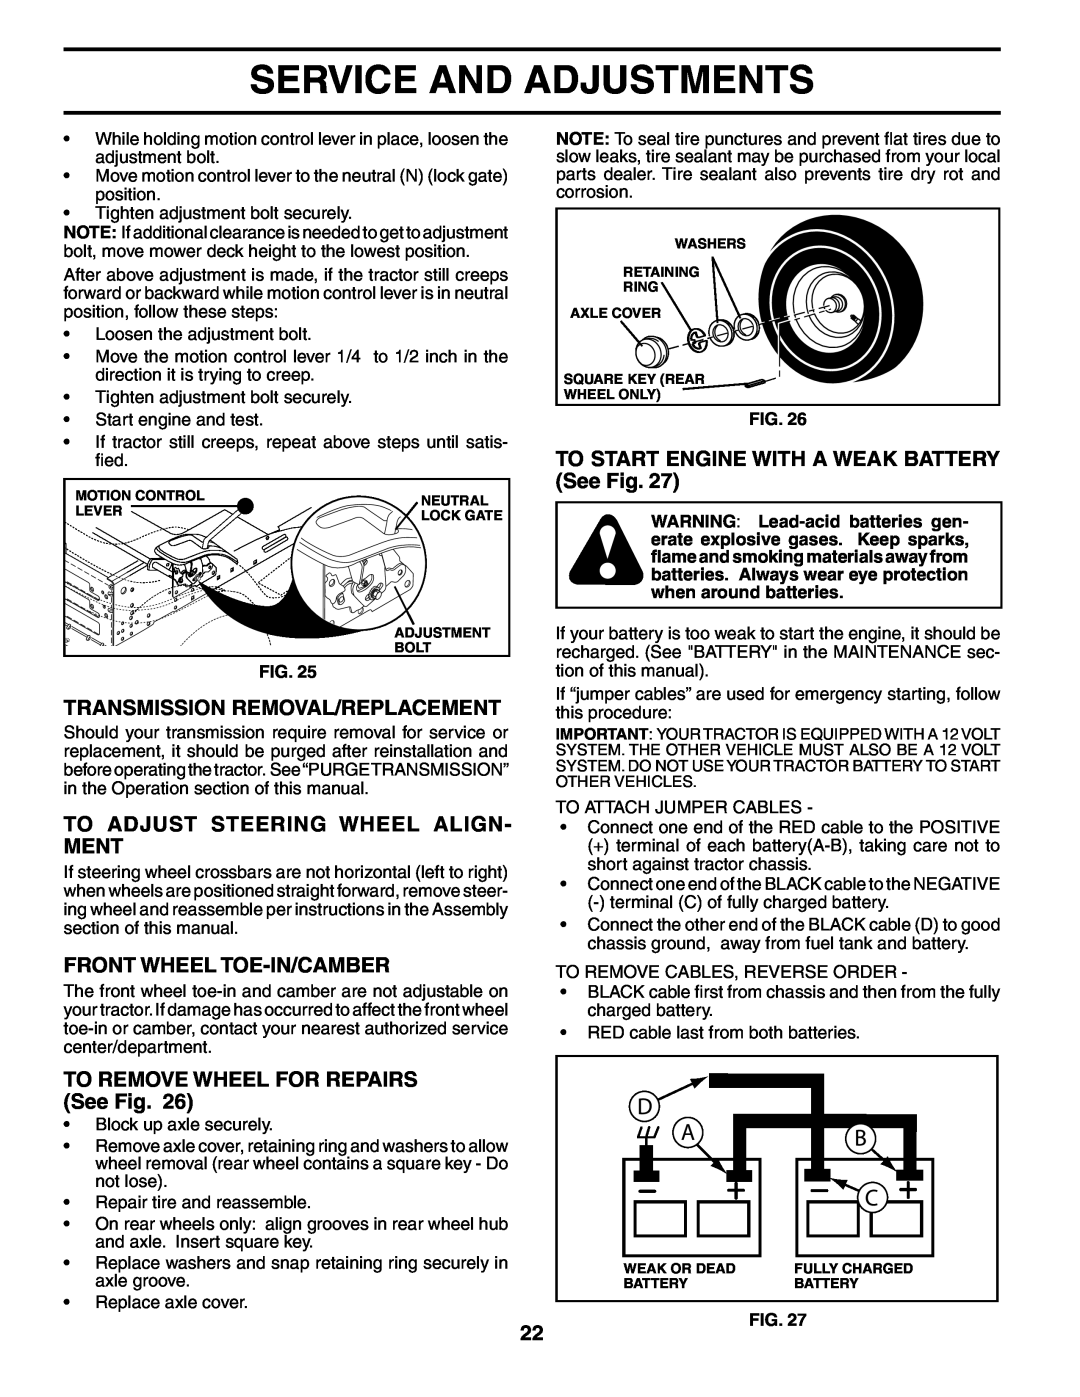 Poulan PK19H42YT manual Transmission Removal/Replacement, To Adjust Steering Wheel Align- Ment, Front Wheel Toe-In/Camber 